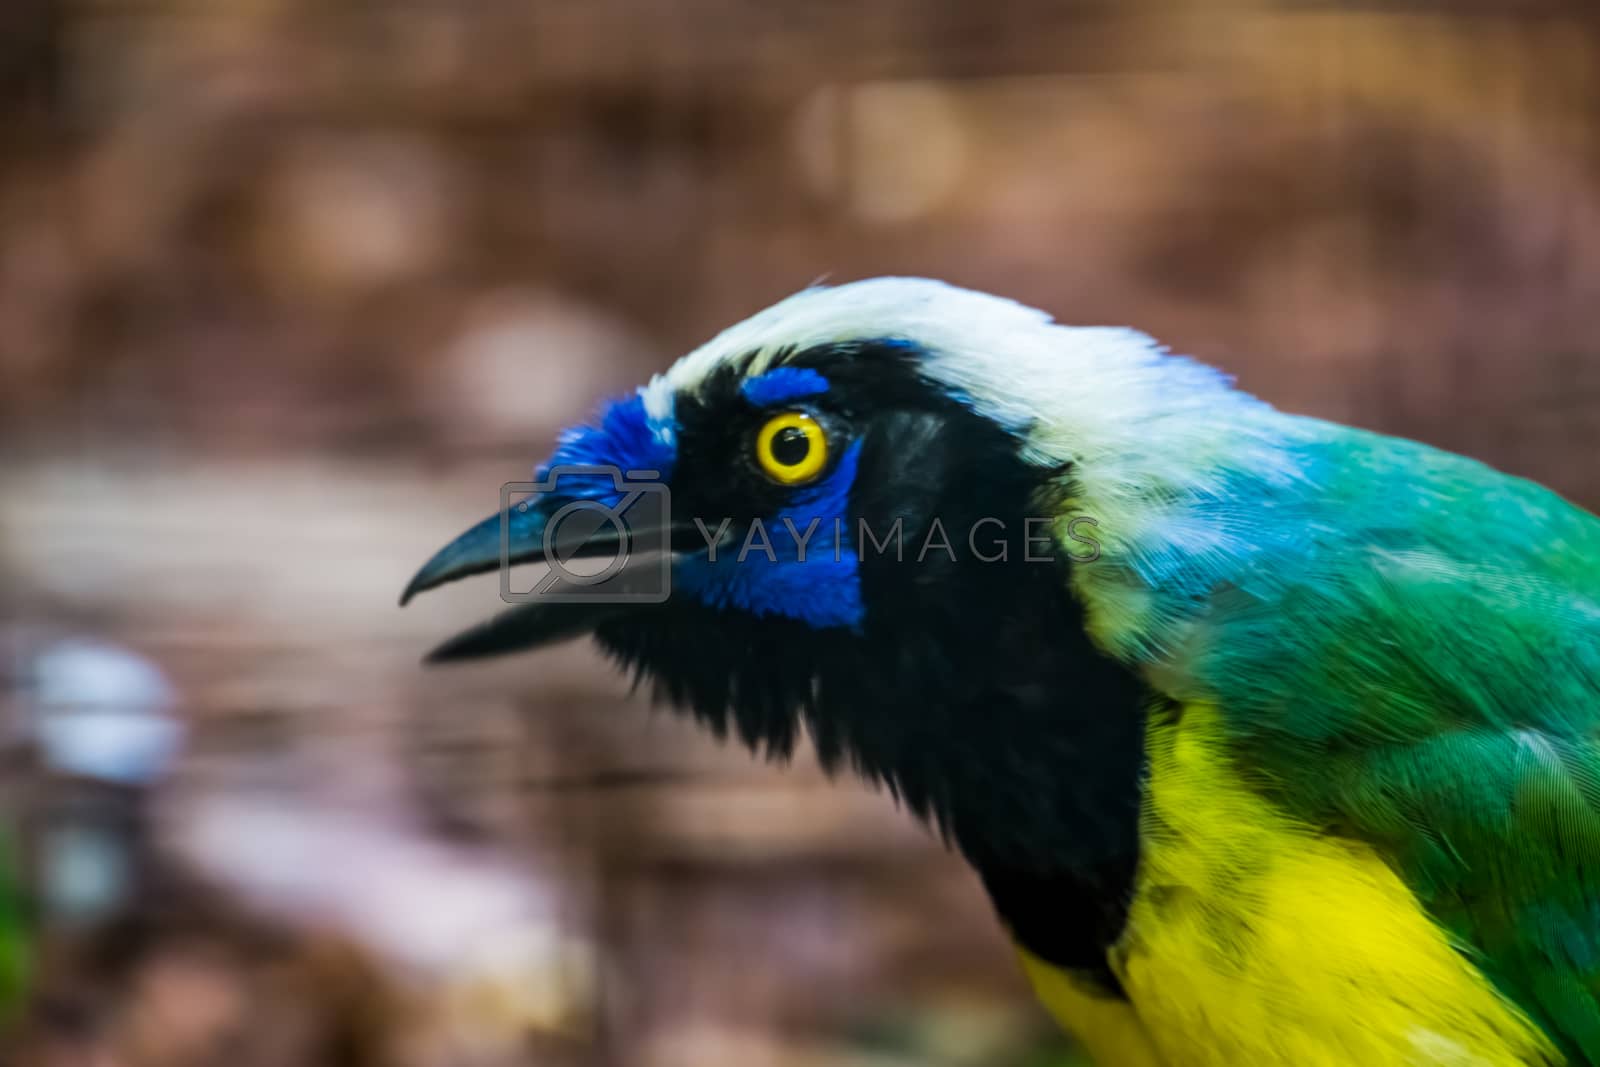 Royalty free image of the face of a inca jay in closeup, colorful tropical bird specie from America by charlottebleijenberg